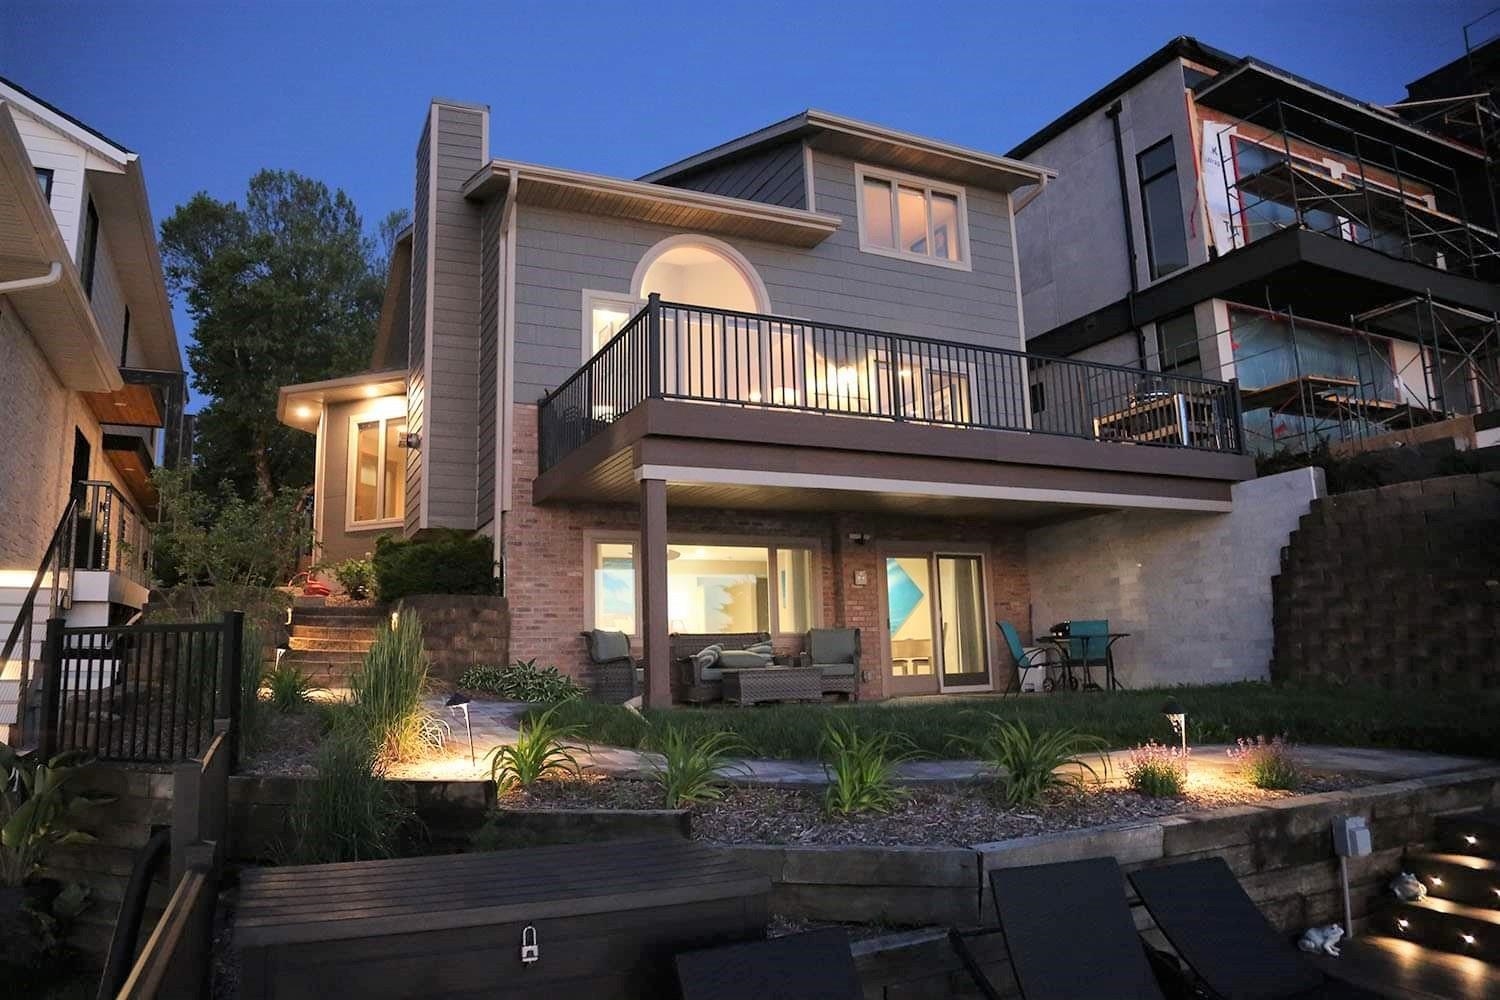 Peace, Tranquility & Picturesque Sunset Views! Located on 45 feet of desirable West facing lakeshore frontage! Enjoy summer evenings on the lake using one of the multiple deck and patio options. This stunning home features 2 full master suites with panoramic views! The lower level suite includes modern updates and a walk-out to the deck & dock. The main level showcases vaulted ceilings, hardwood flooring, new carpet, and the 1st of 3 fireplaces. A total of 4 bedrooms and 4 bathrooms, this unique property has room for the whole family to enjoy life on the Lake! Call today to schedule your private showing.